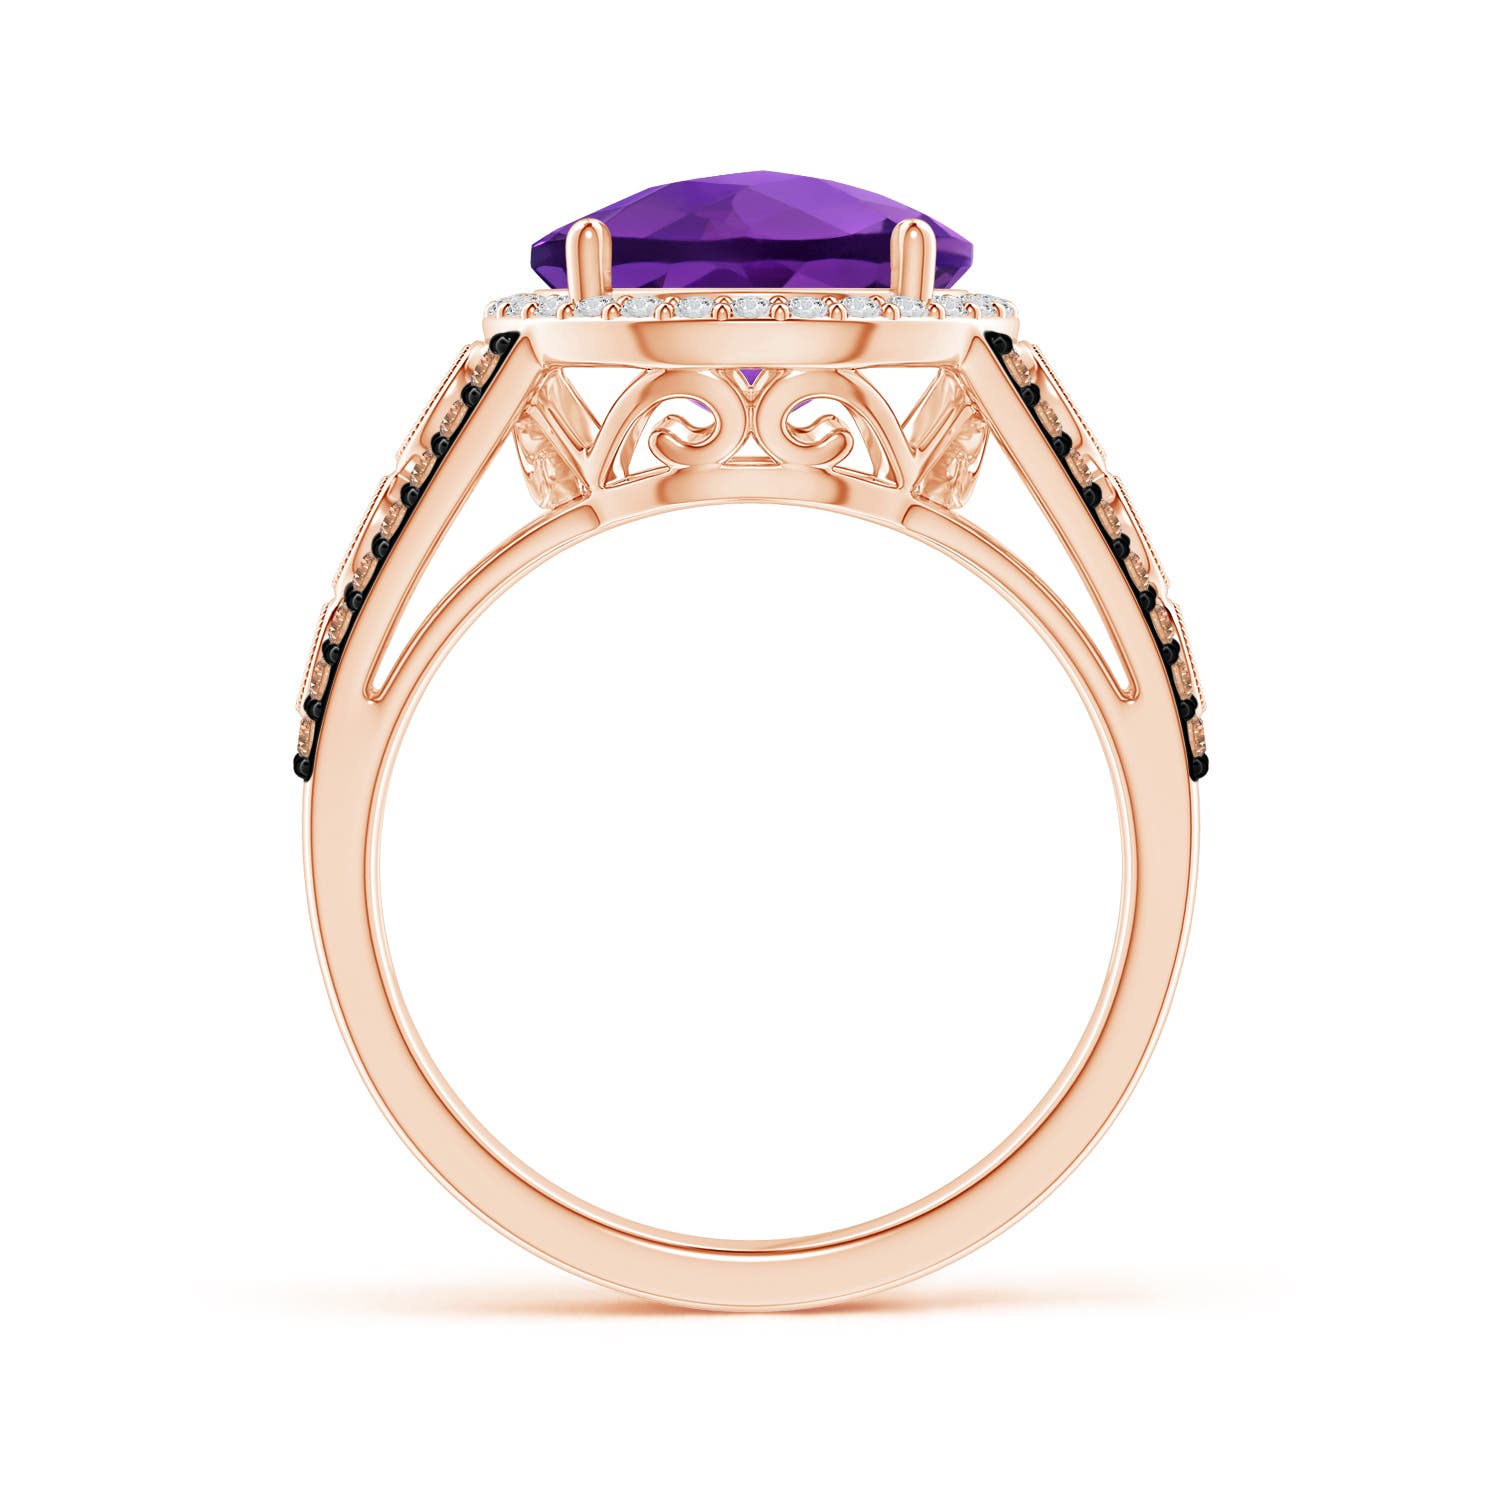 AAA - Amethyst / 4.42 CT / 14 KT Rose Gold